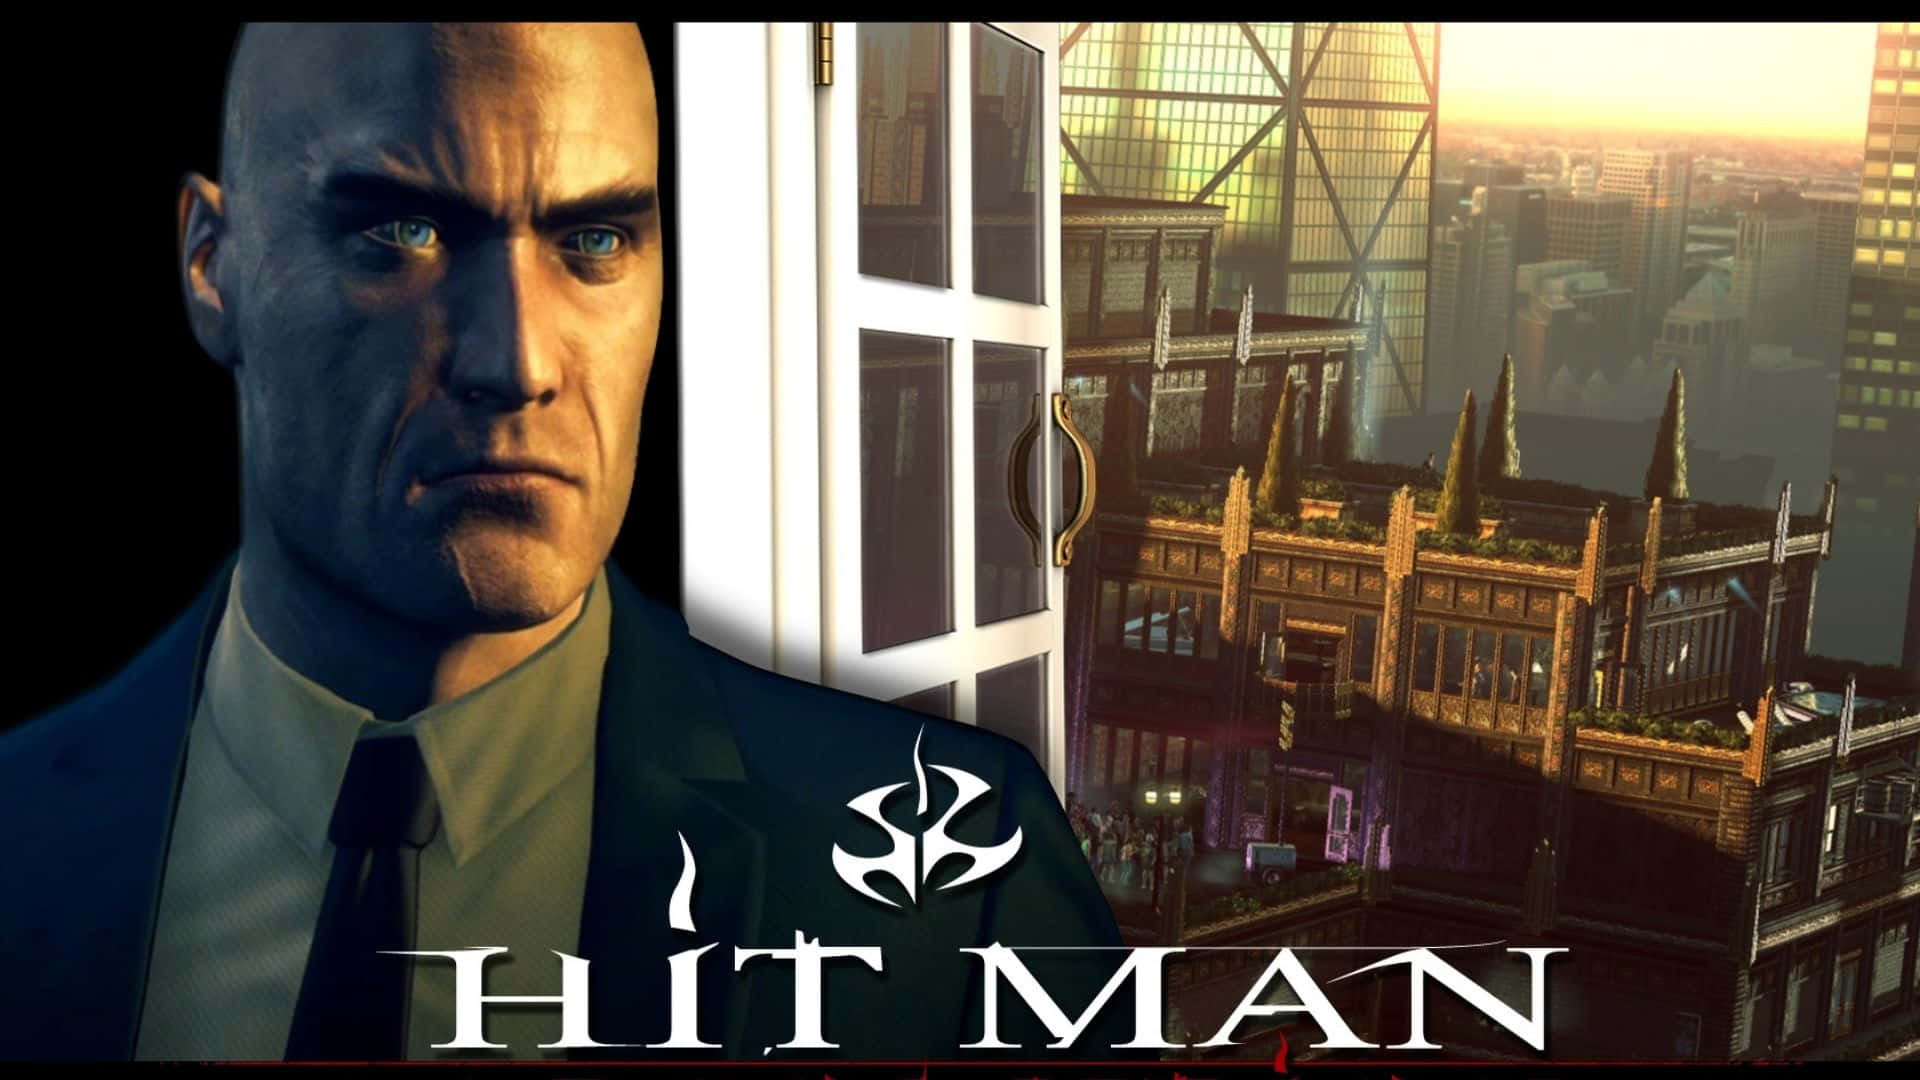 Agent 47 on Mission in 'Hitman Absolution'